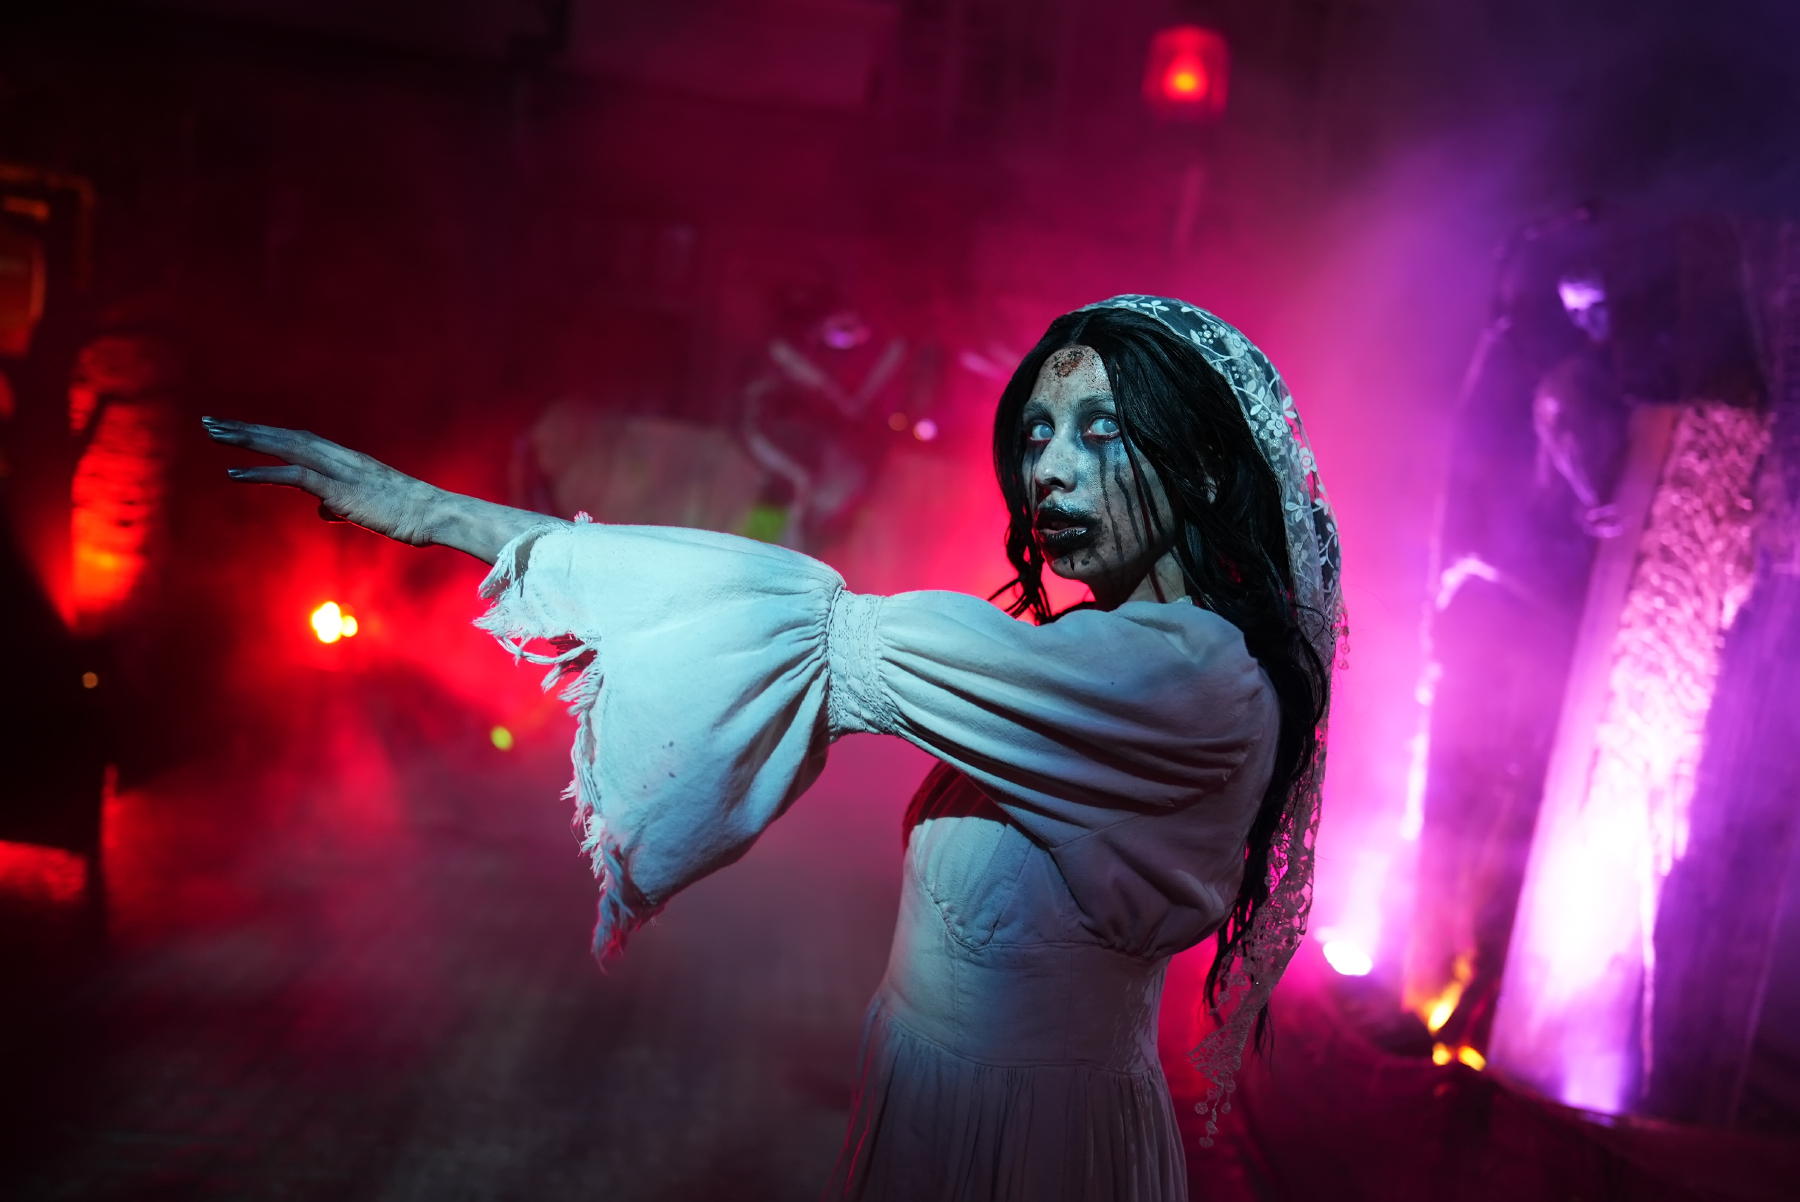 Everything to Know About Universal Studios Halloween Horror Nights